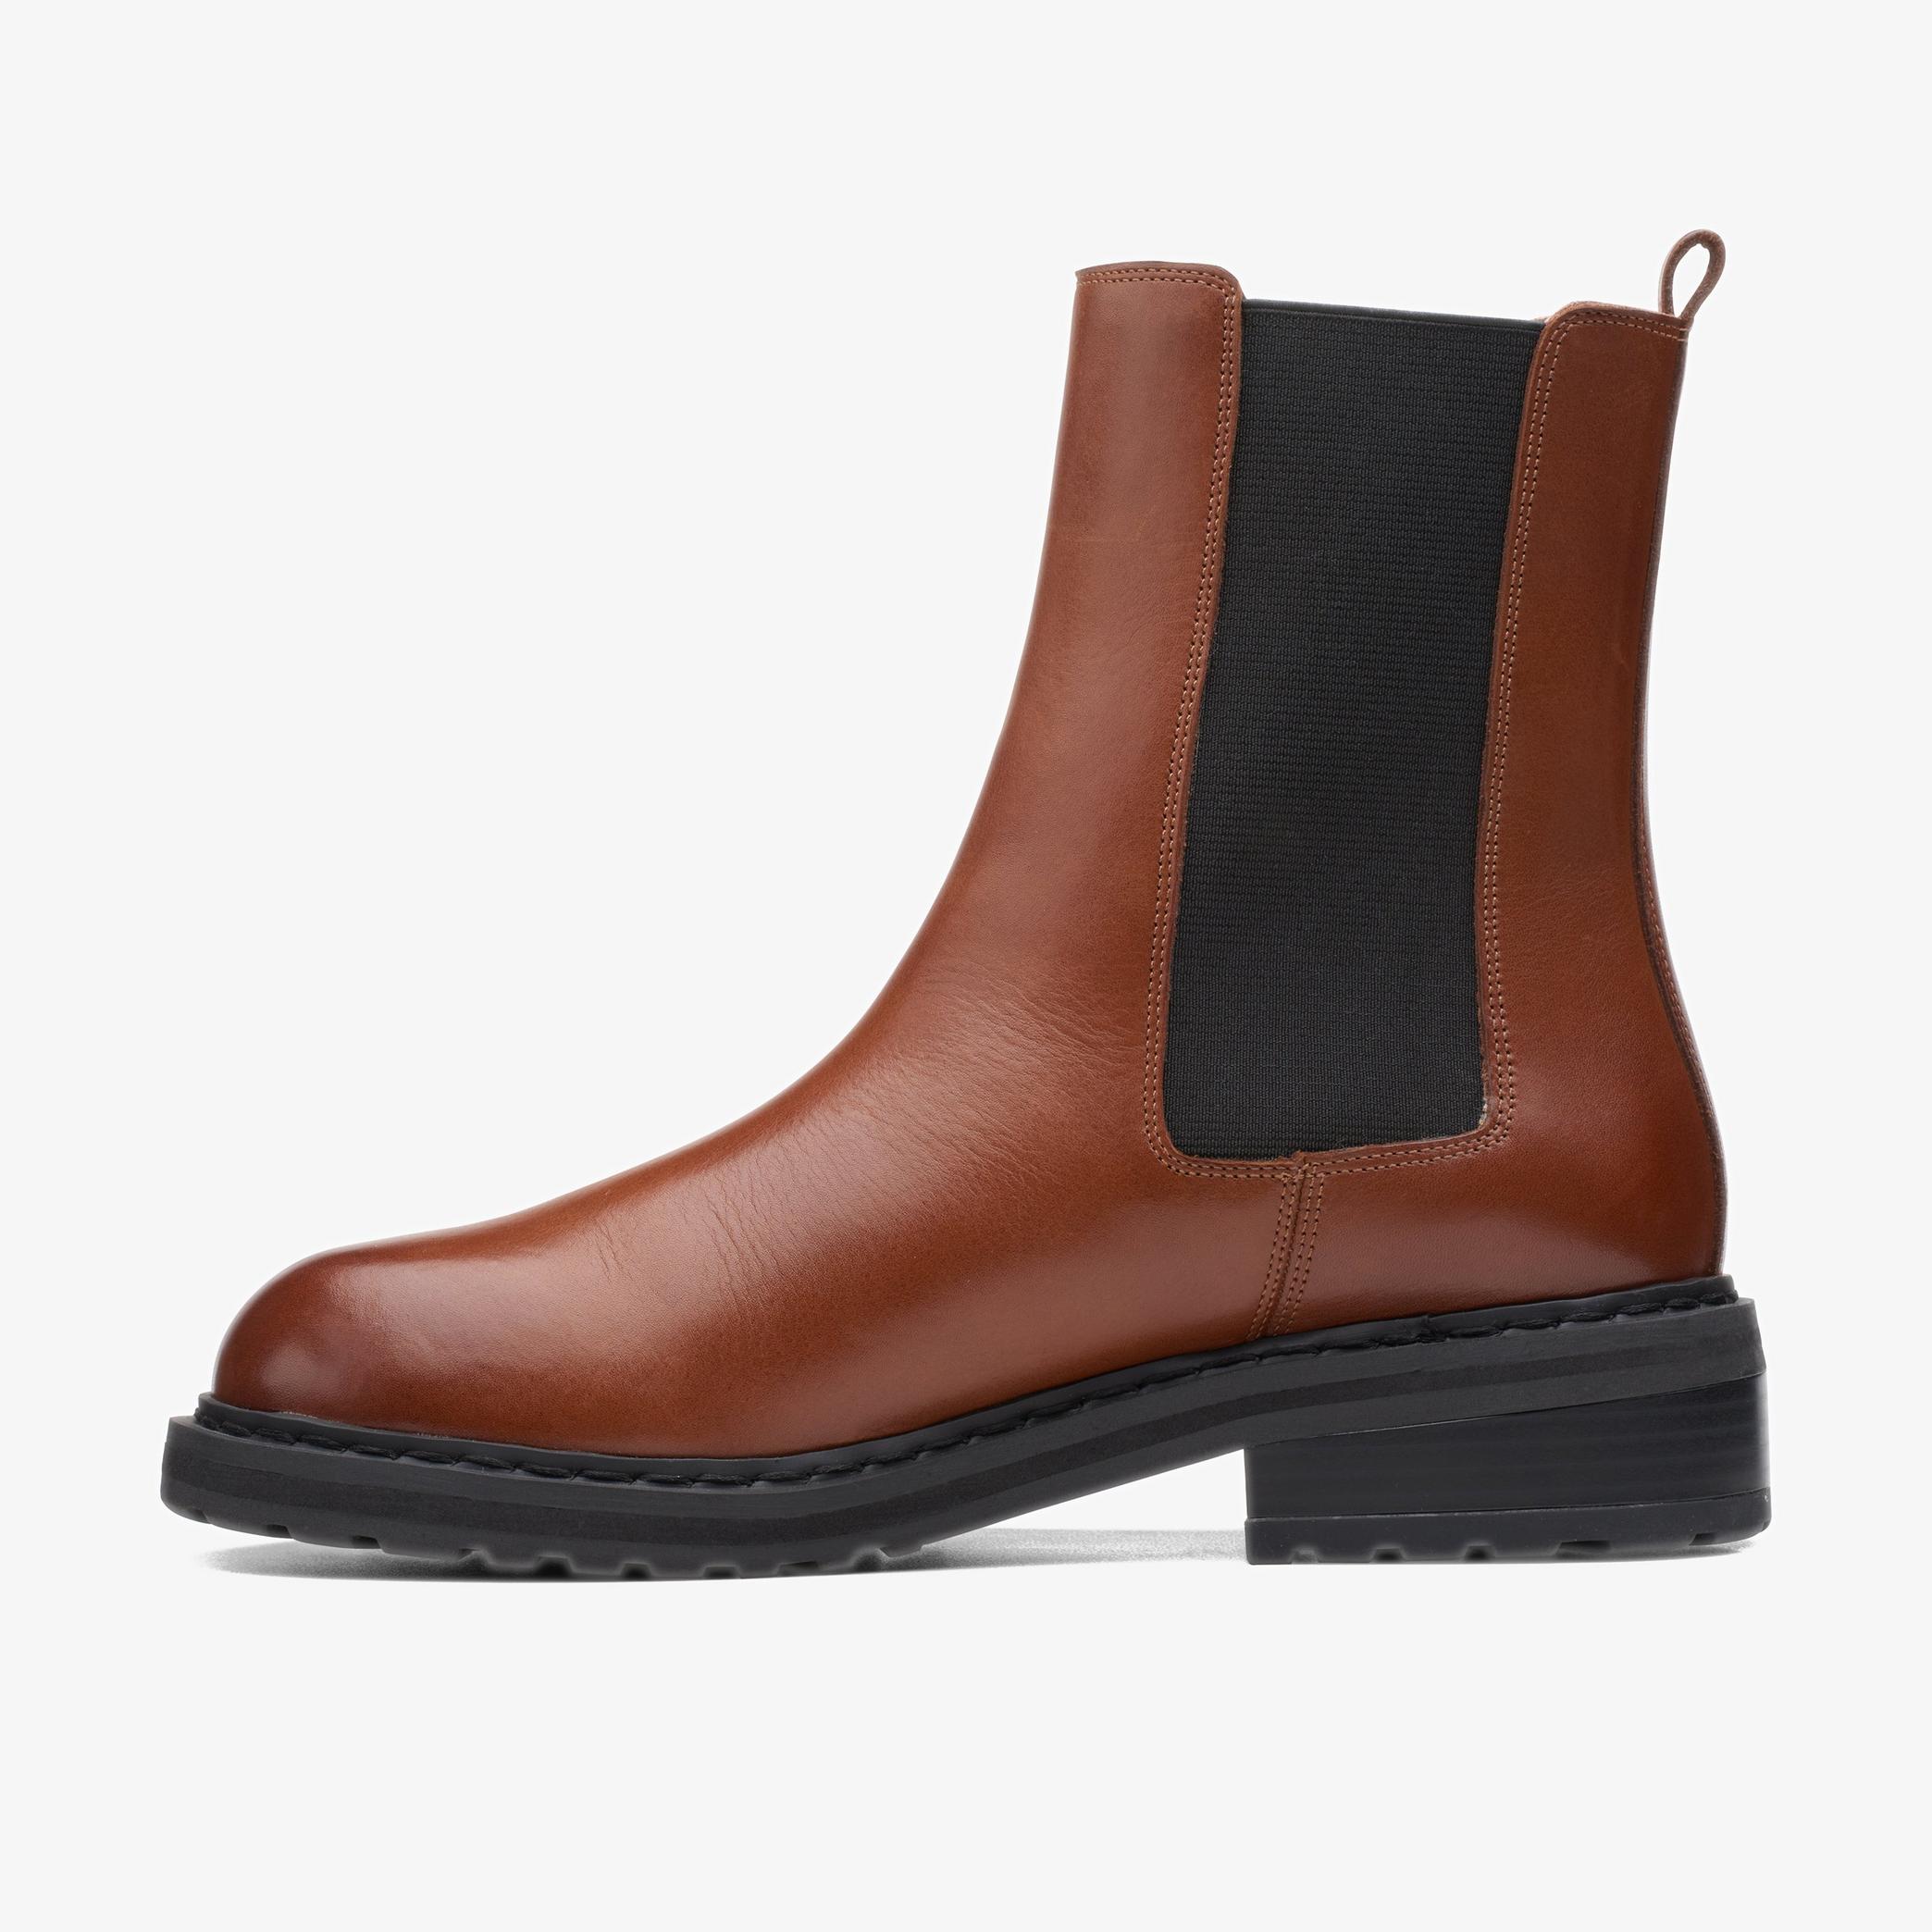 Tilham Chelsea Dark Tan Leather Ankle Boots, view 2 of 6